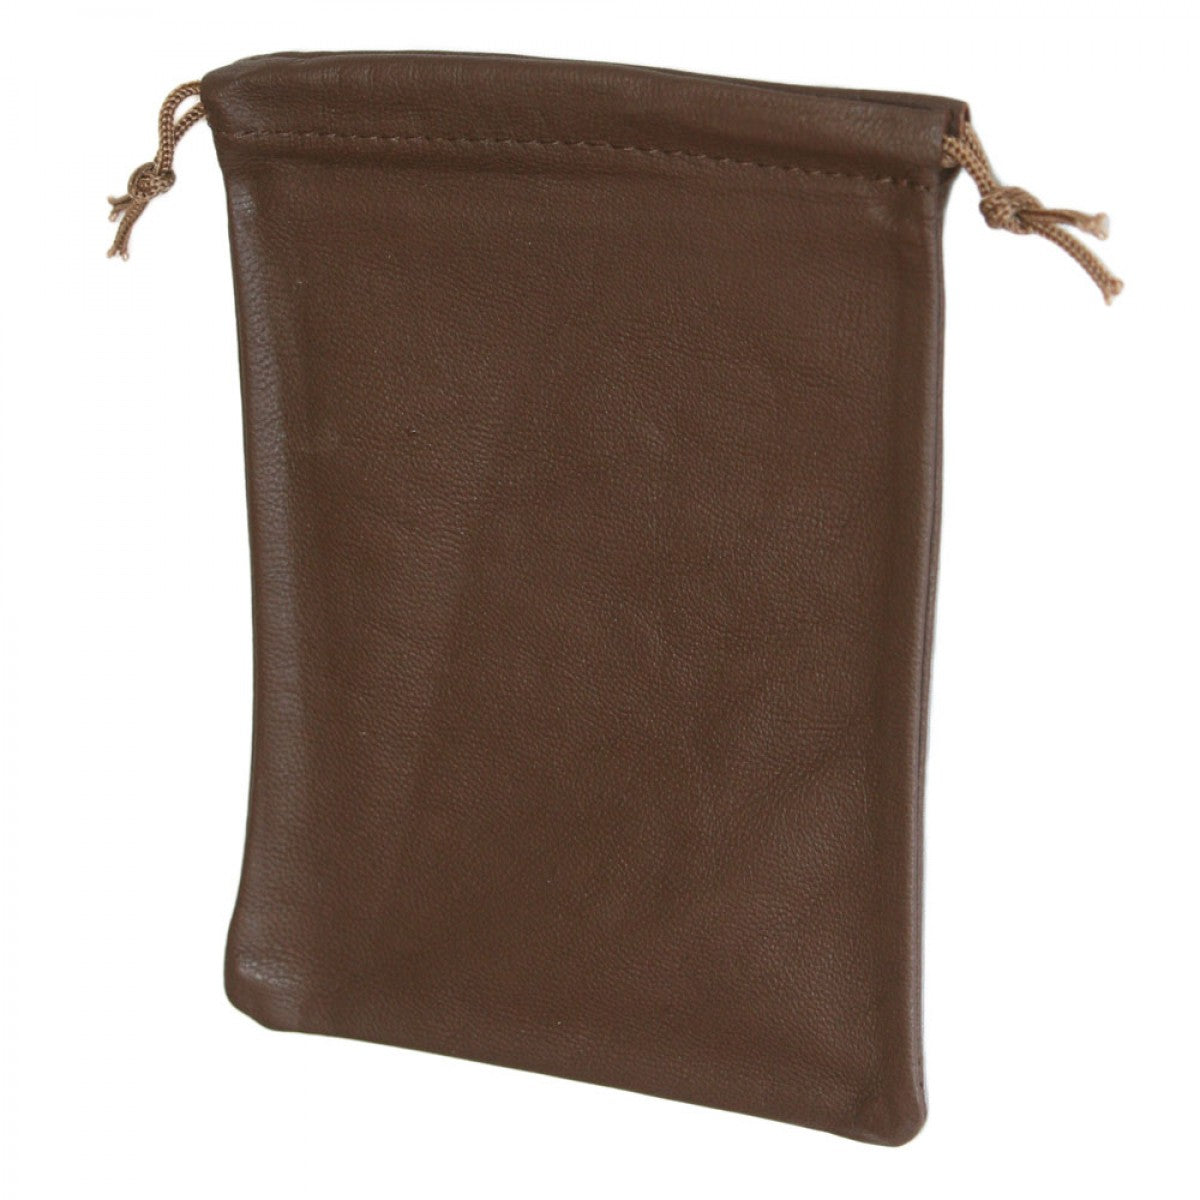 GENUINE LEATHER POUCH  3.75" x 5.5"  (KLP-5)